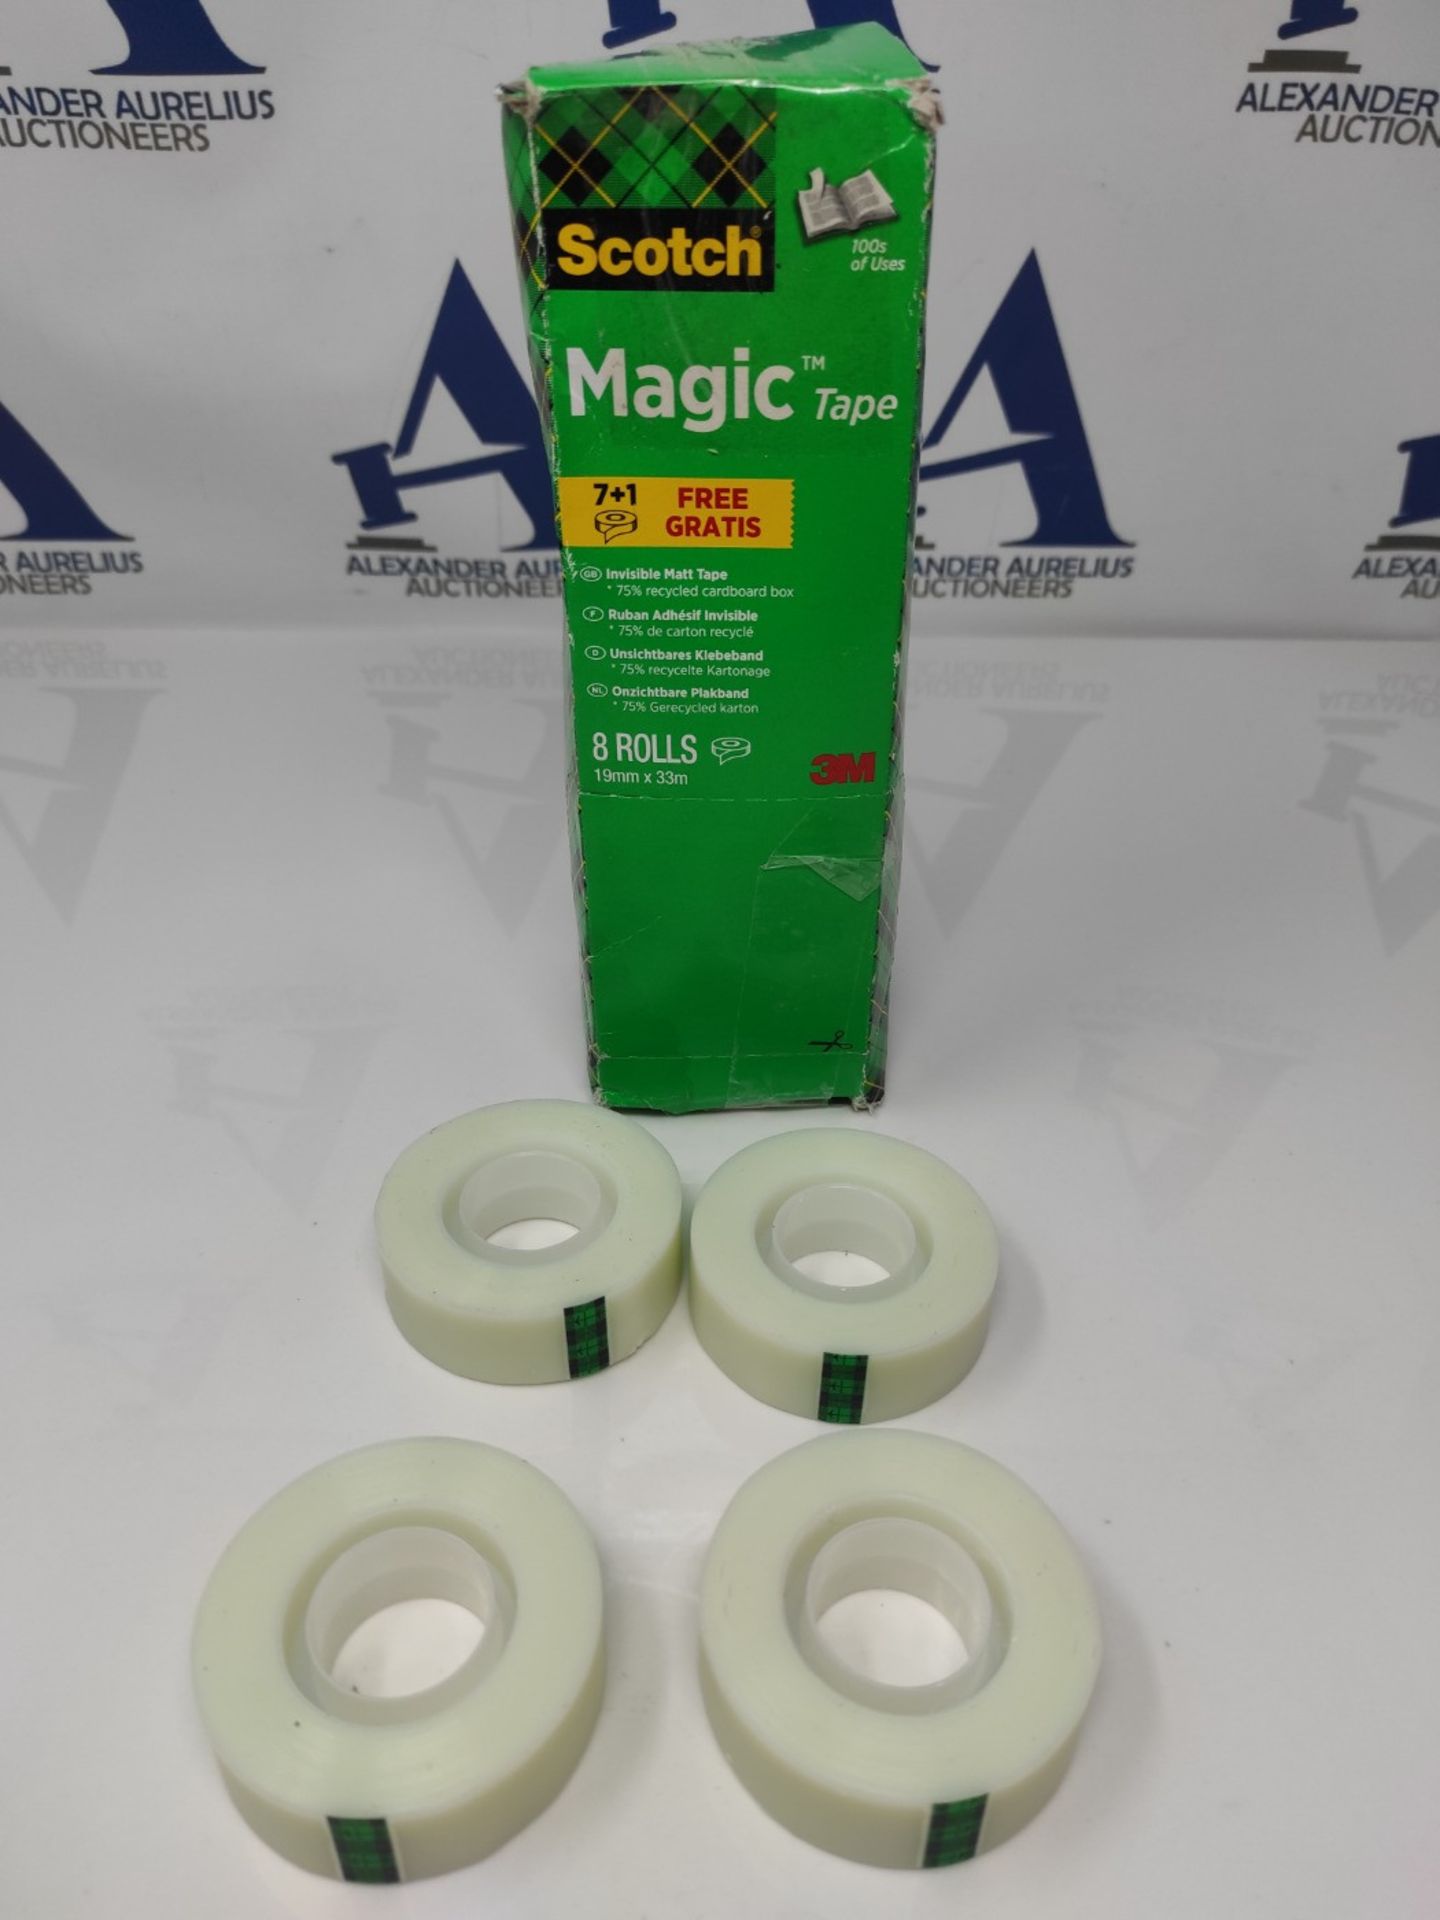 Scotch Magic Tape, Value Pack, 8 Rolls , 19 mm x 33 m - General Purpose Sticky Tape fo - Image 2 of 2